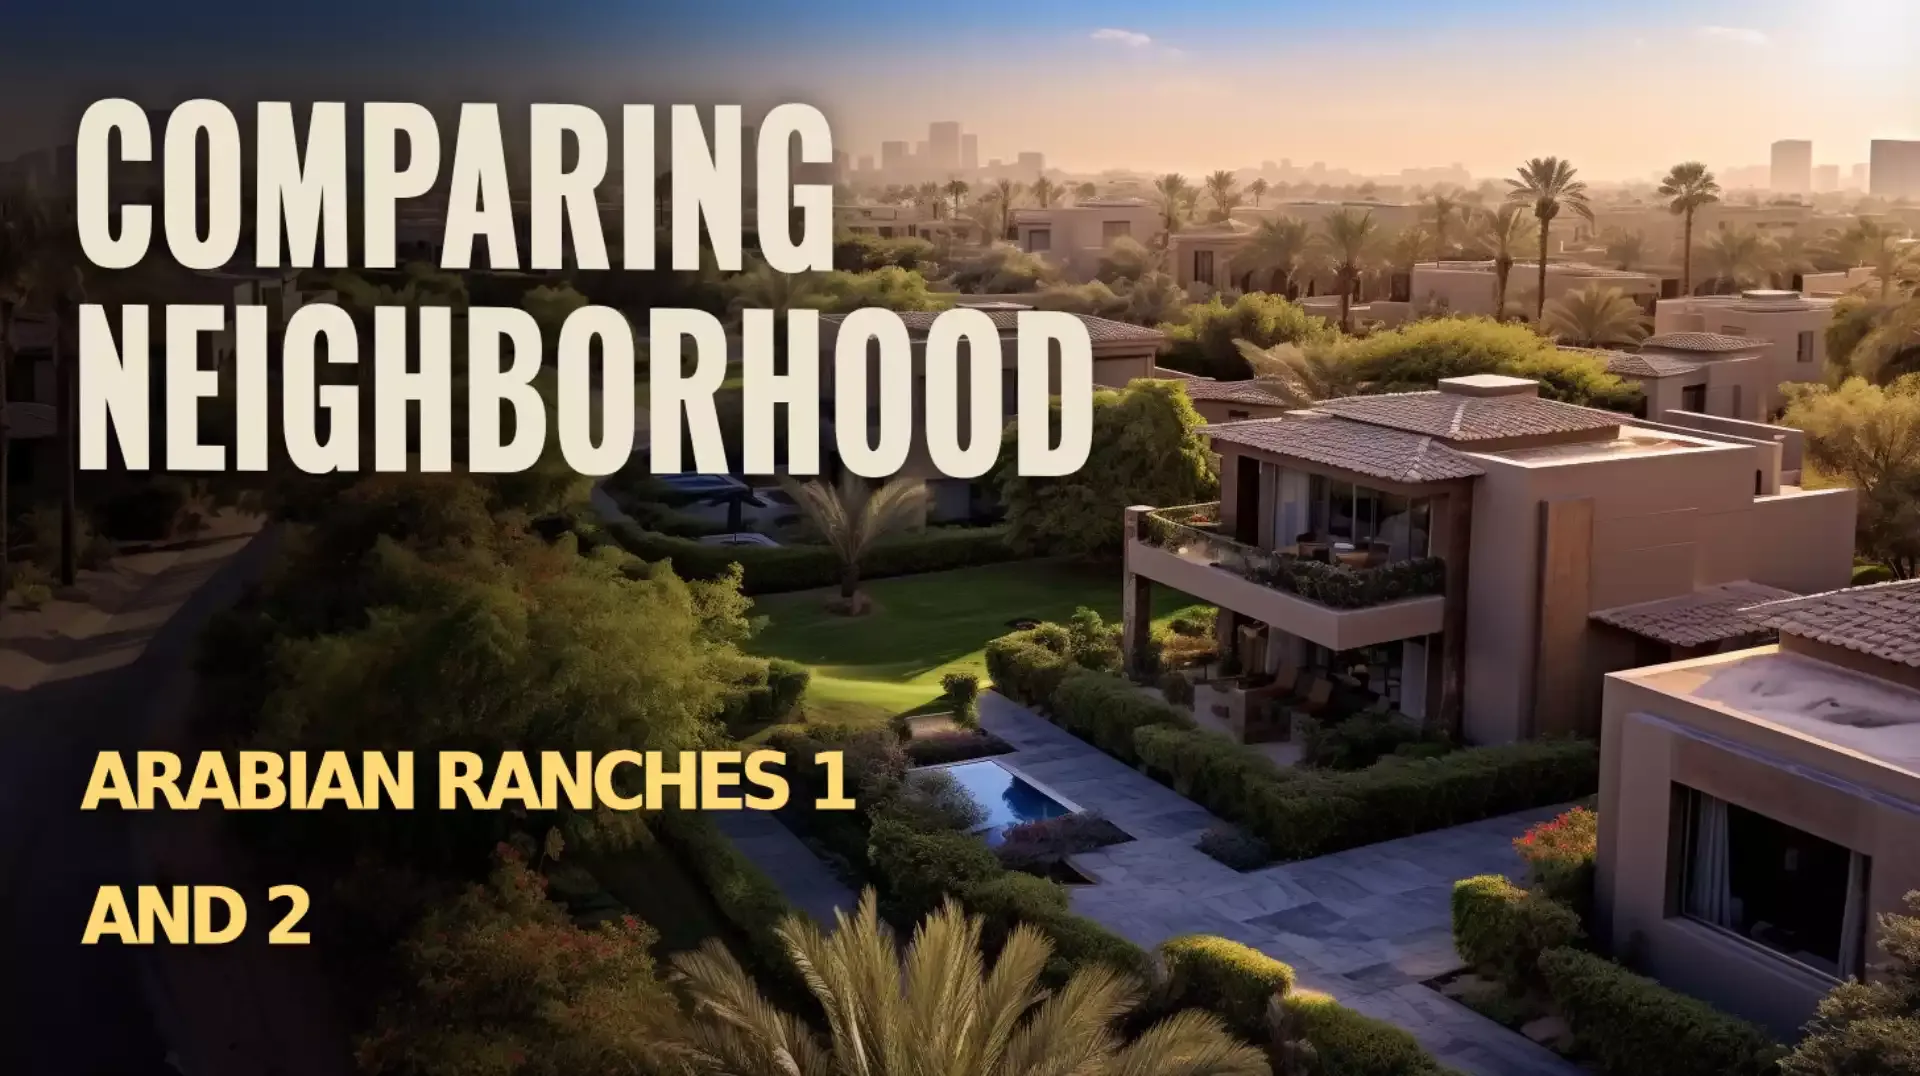 Arabian Ranches 1 and 2: Masterfully Designed Communities